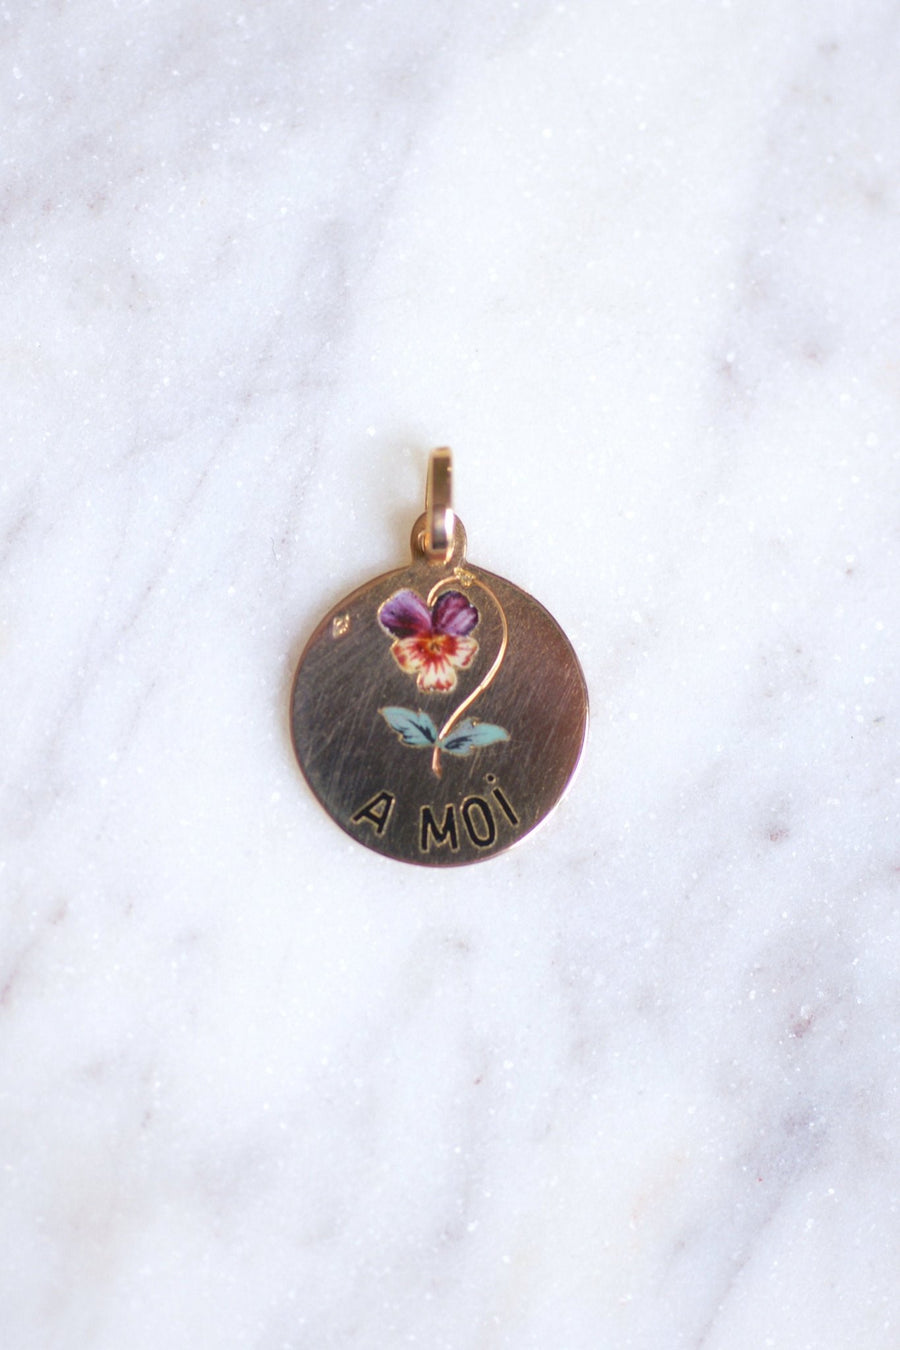 Sentimental medal "think of me" in pink gold and enamelled pansy, 19th Century - Galerie Pénélope